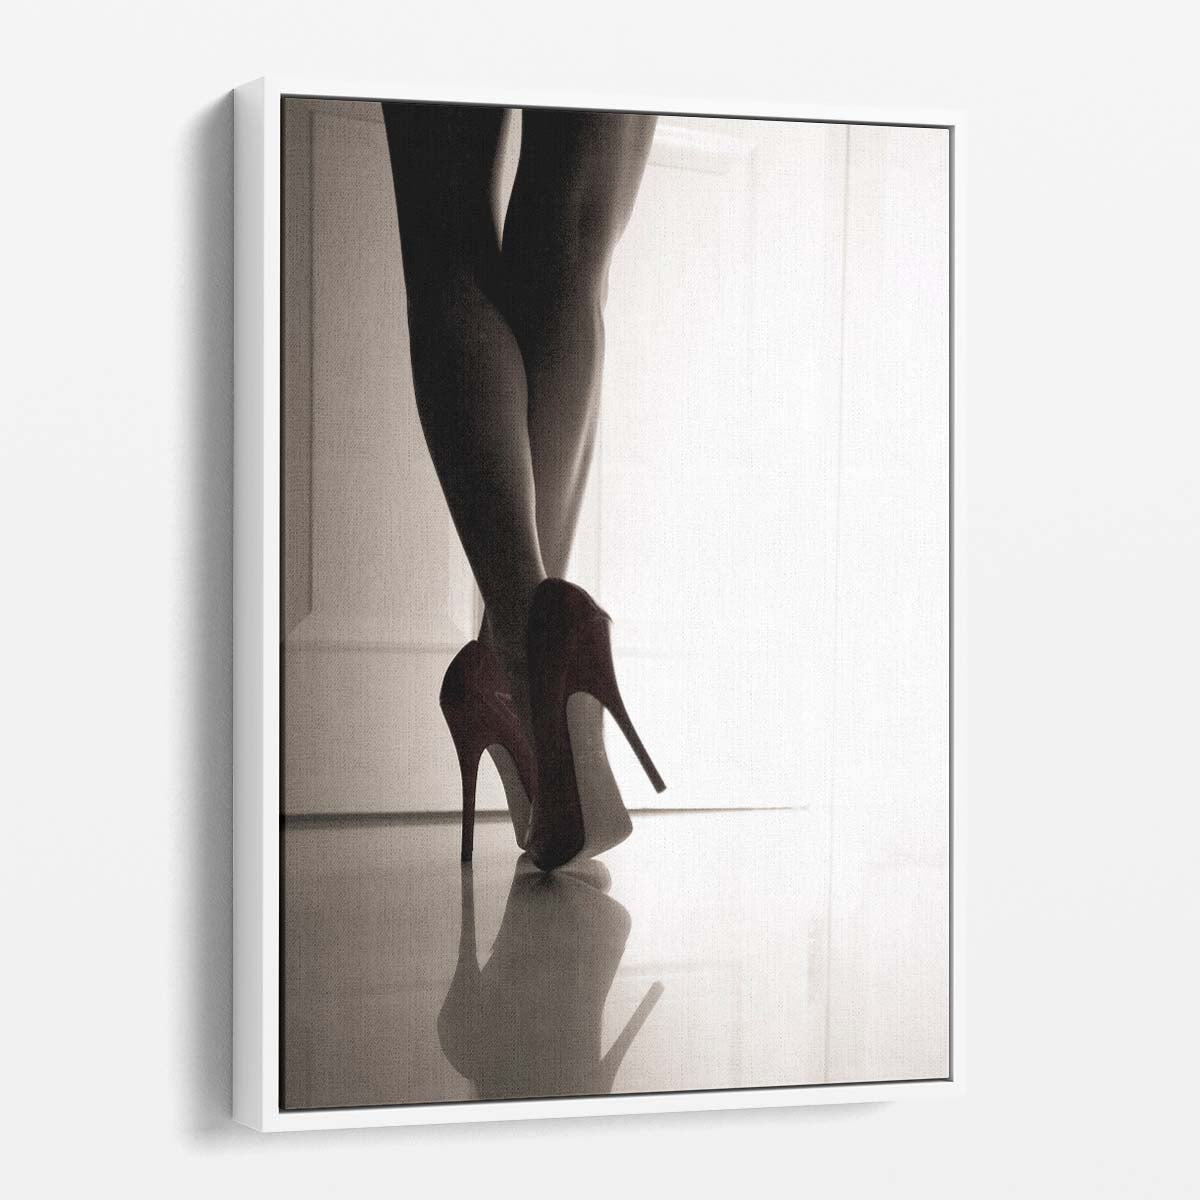 Sensual Abstract Photography - Woman in High Heels at Doorway by Luxuriance Designs, made in USA